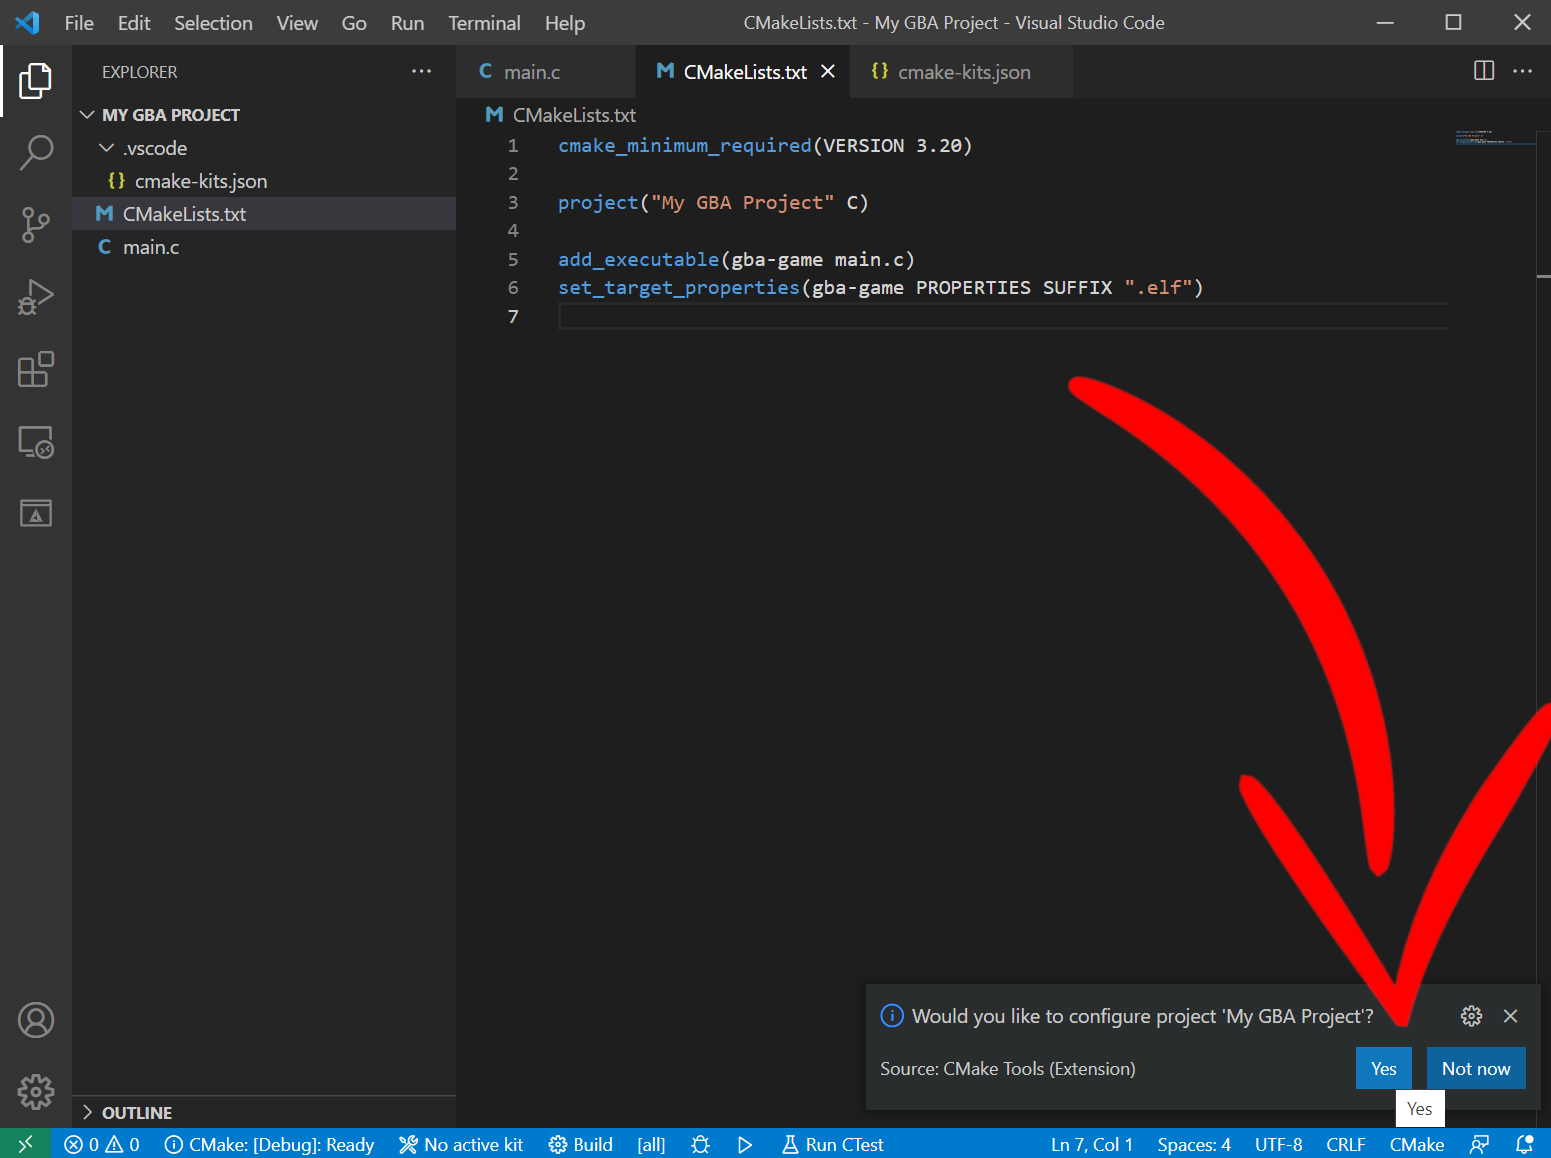 VSCode configure dialogue with a red arrow pointing at the Yes button